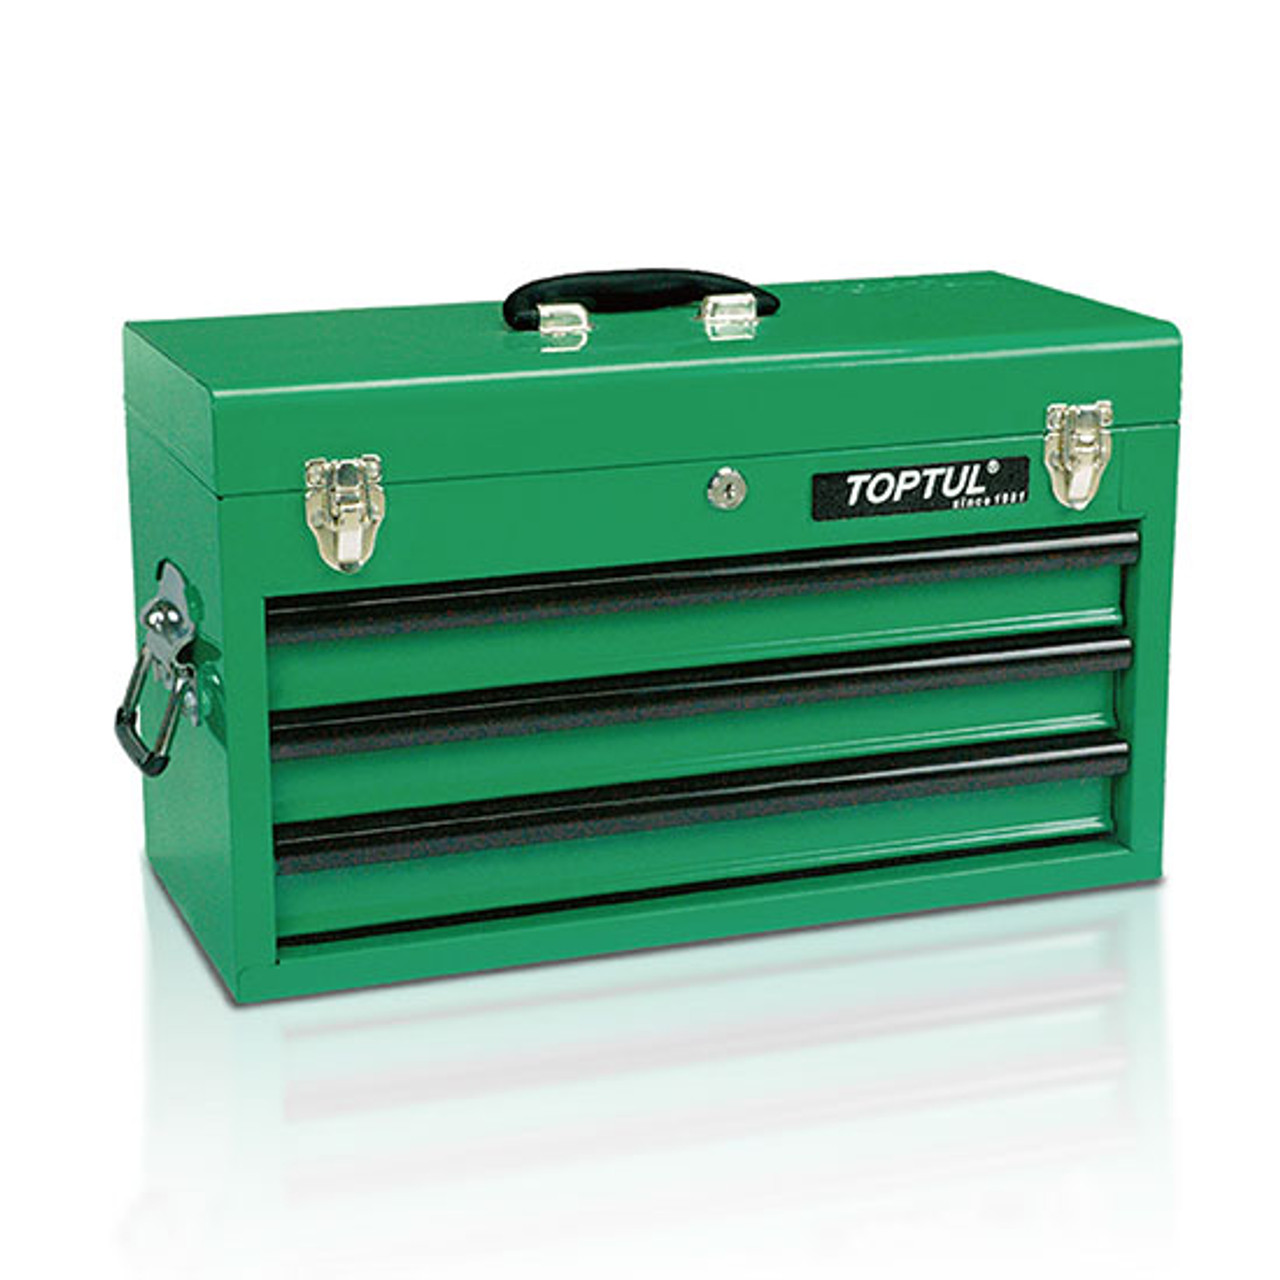 Toptul 82pc Professional Mechanical Tool Chest Set GREEN - Closed